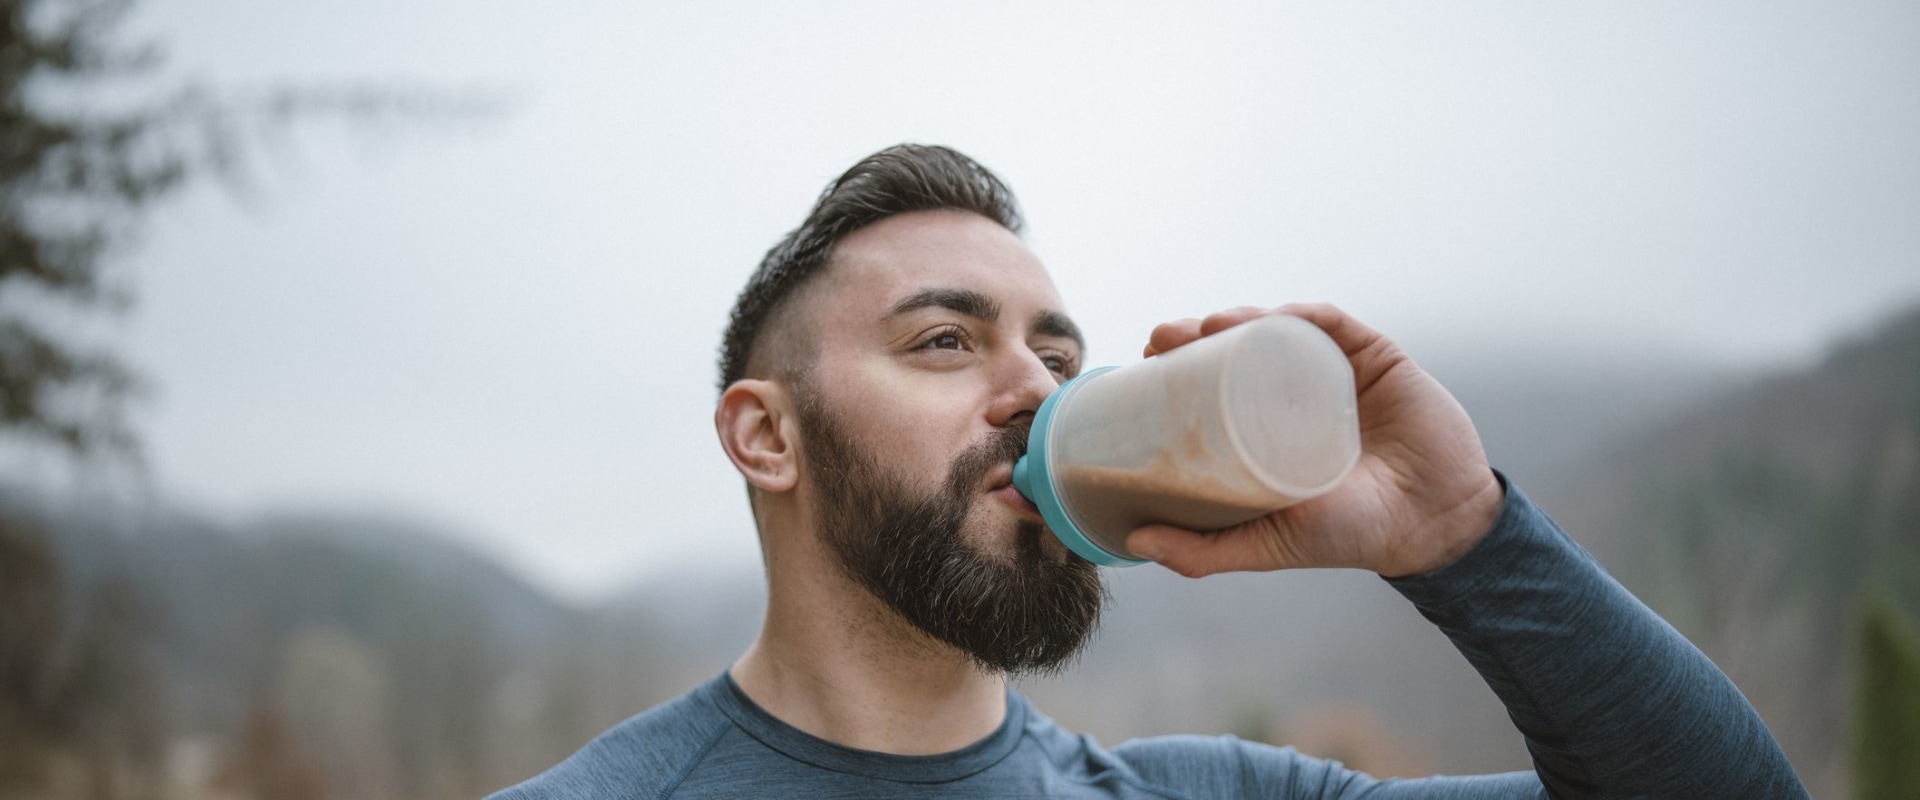 Is it Good to Drink Whey Protein Every Day? - An Expert's Perspective